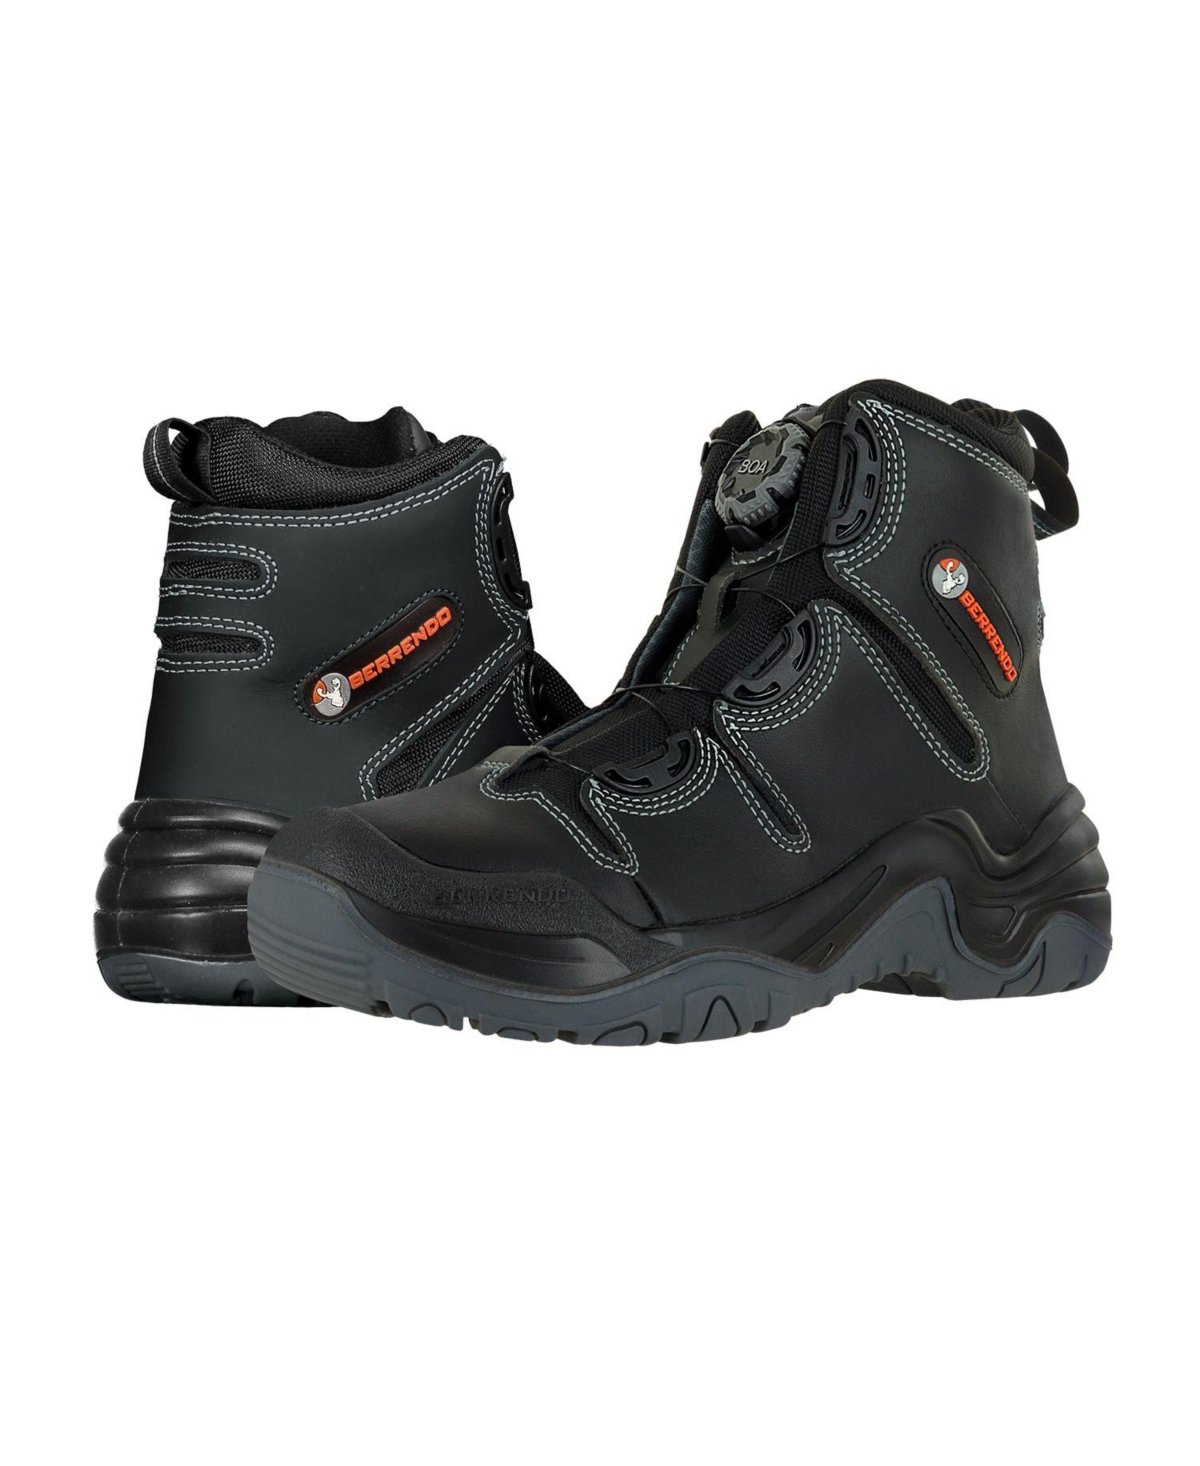 Men's Steel Toe Work Boots 6" - Oil and Slip Resistant - Eh Rated - Boa Fit System Fast Release - Black